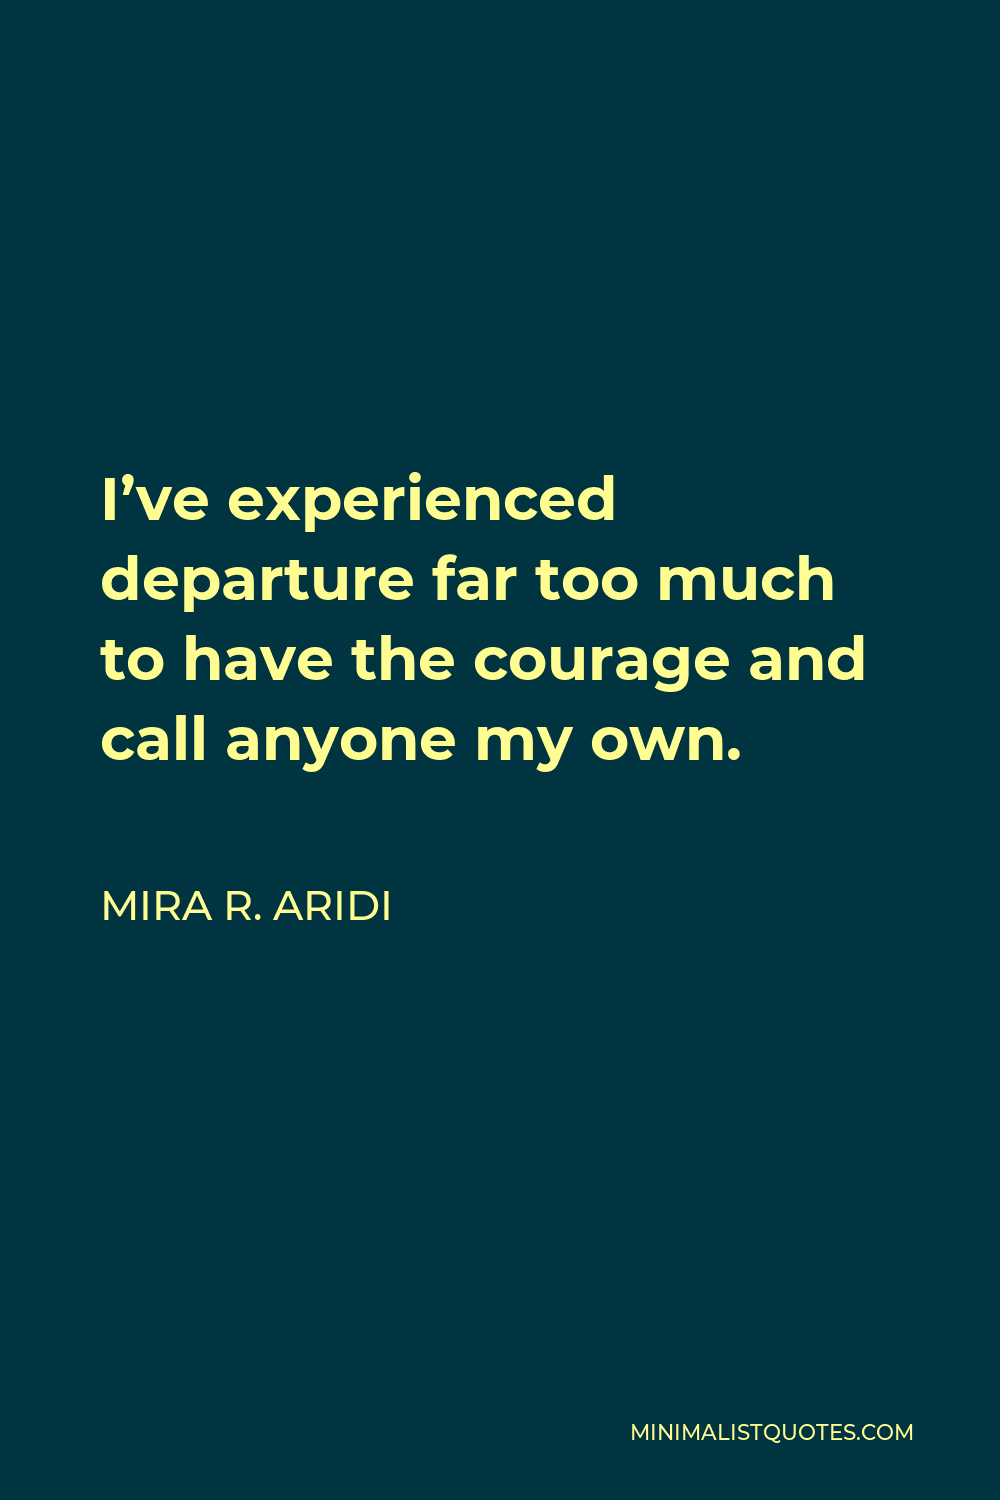 Mira R. Aridi Quote - I’ve experienced departure far too much to have the courage and call anyone my own.